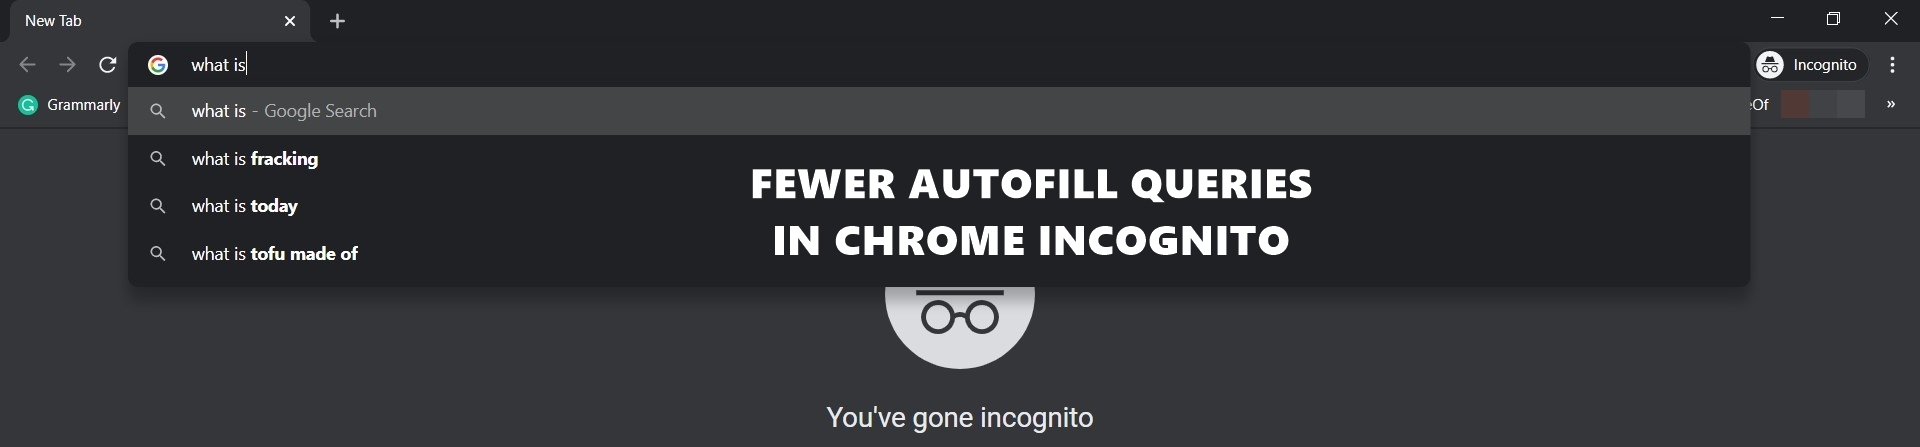 Fewer Autocomplete Queries in Incognito Mode